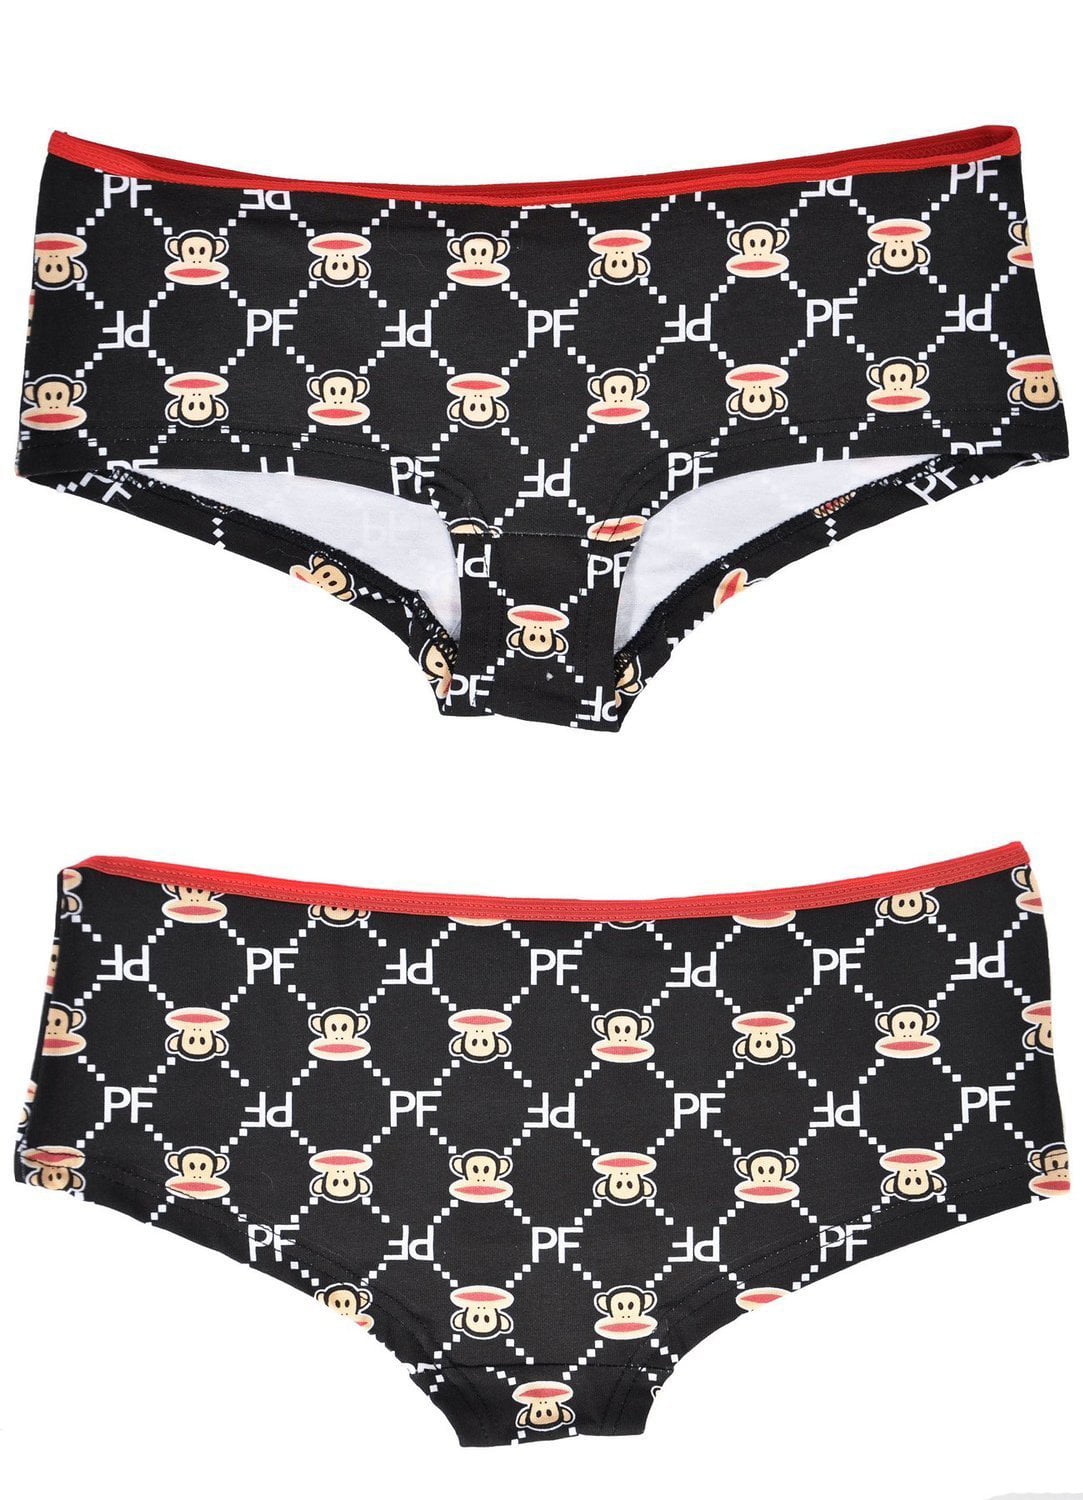 Paul Frank Womens Cheeky Allover Printed Panty